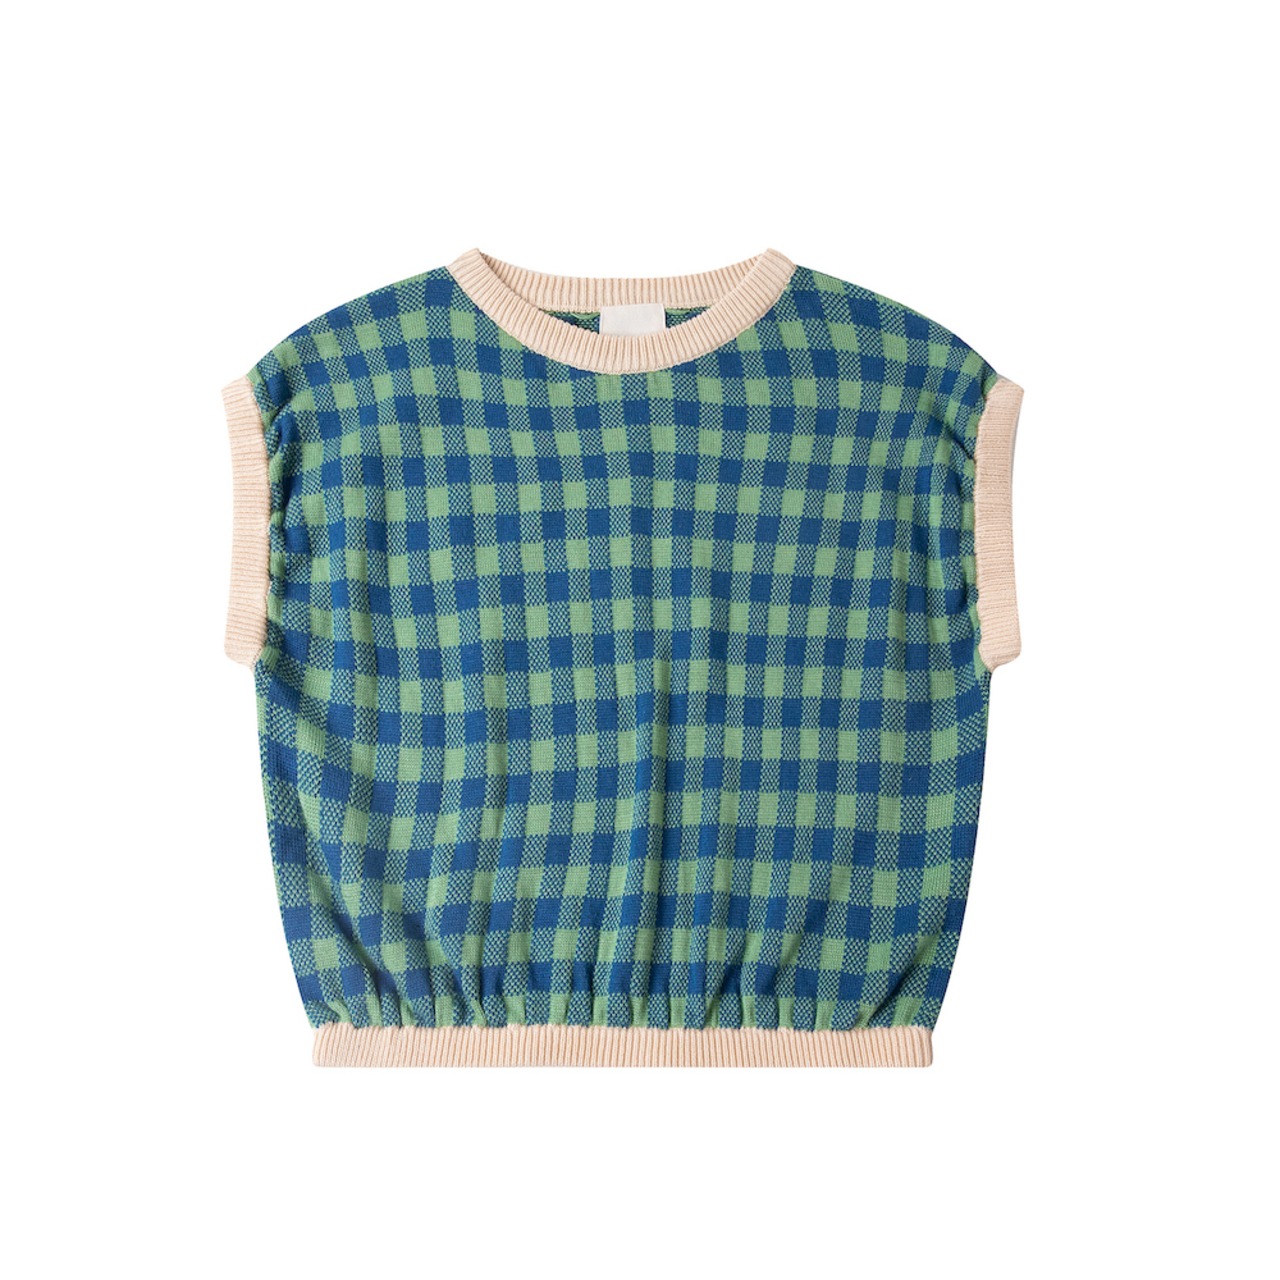 Knit Planet / Coloured Knit / NAVY & GREEN